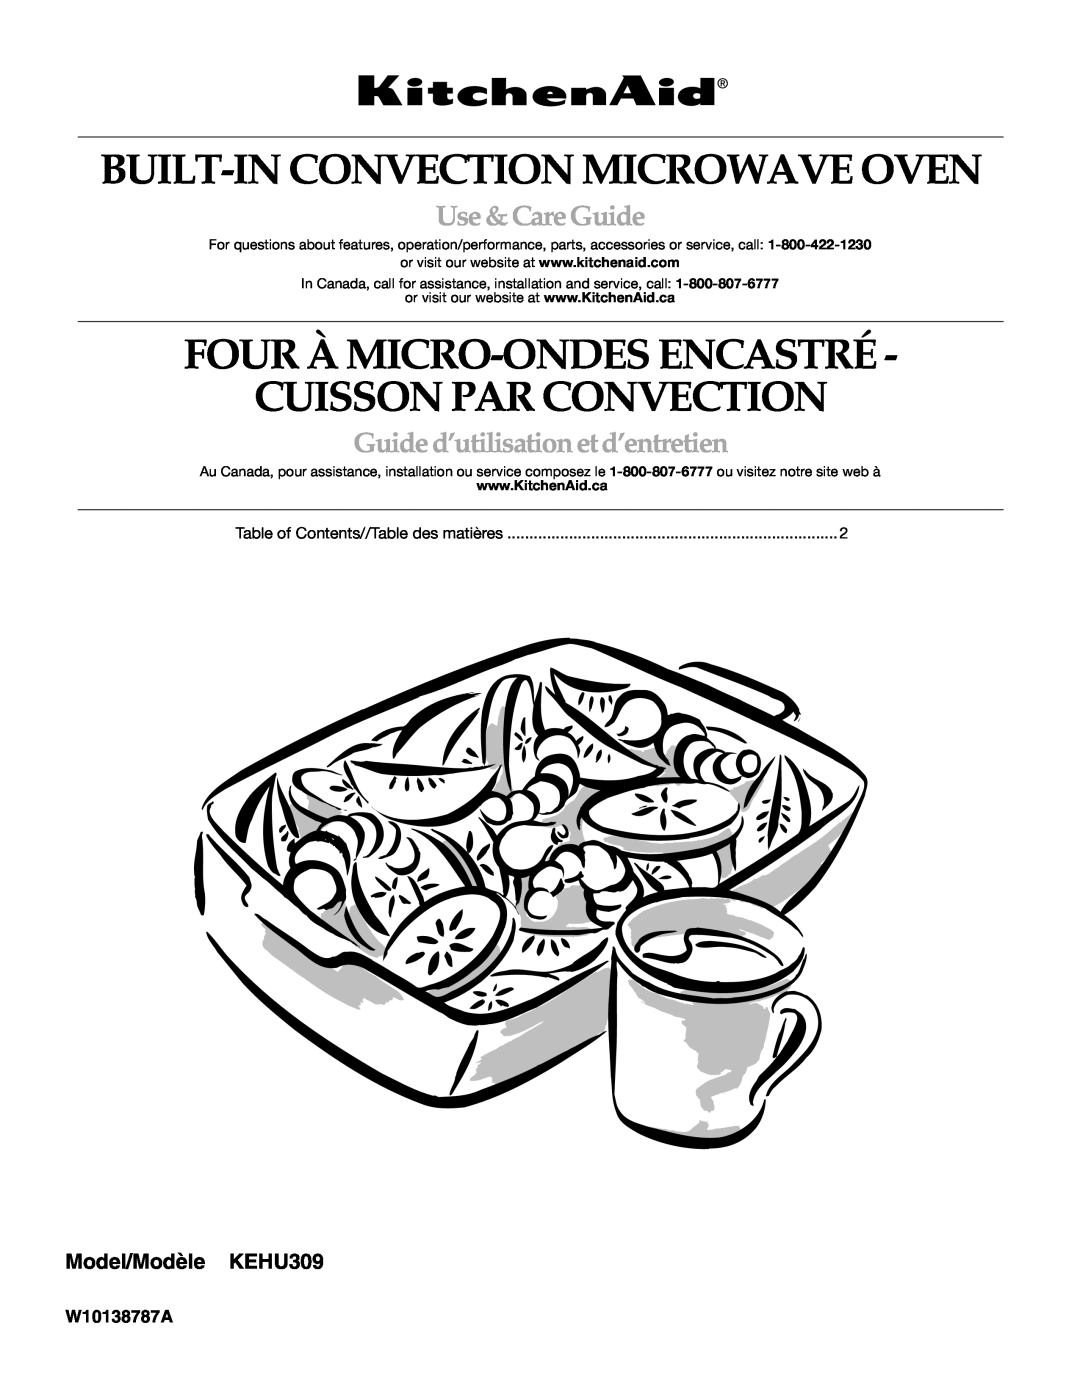 KitchenAid manual Model/Modèle KEHU309, Built-In Convection Microwave Oven, Use &CareGuide, W10138787A 